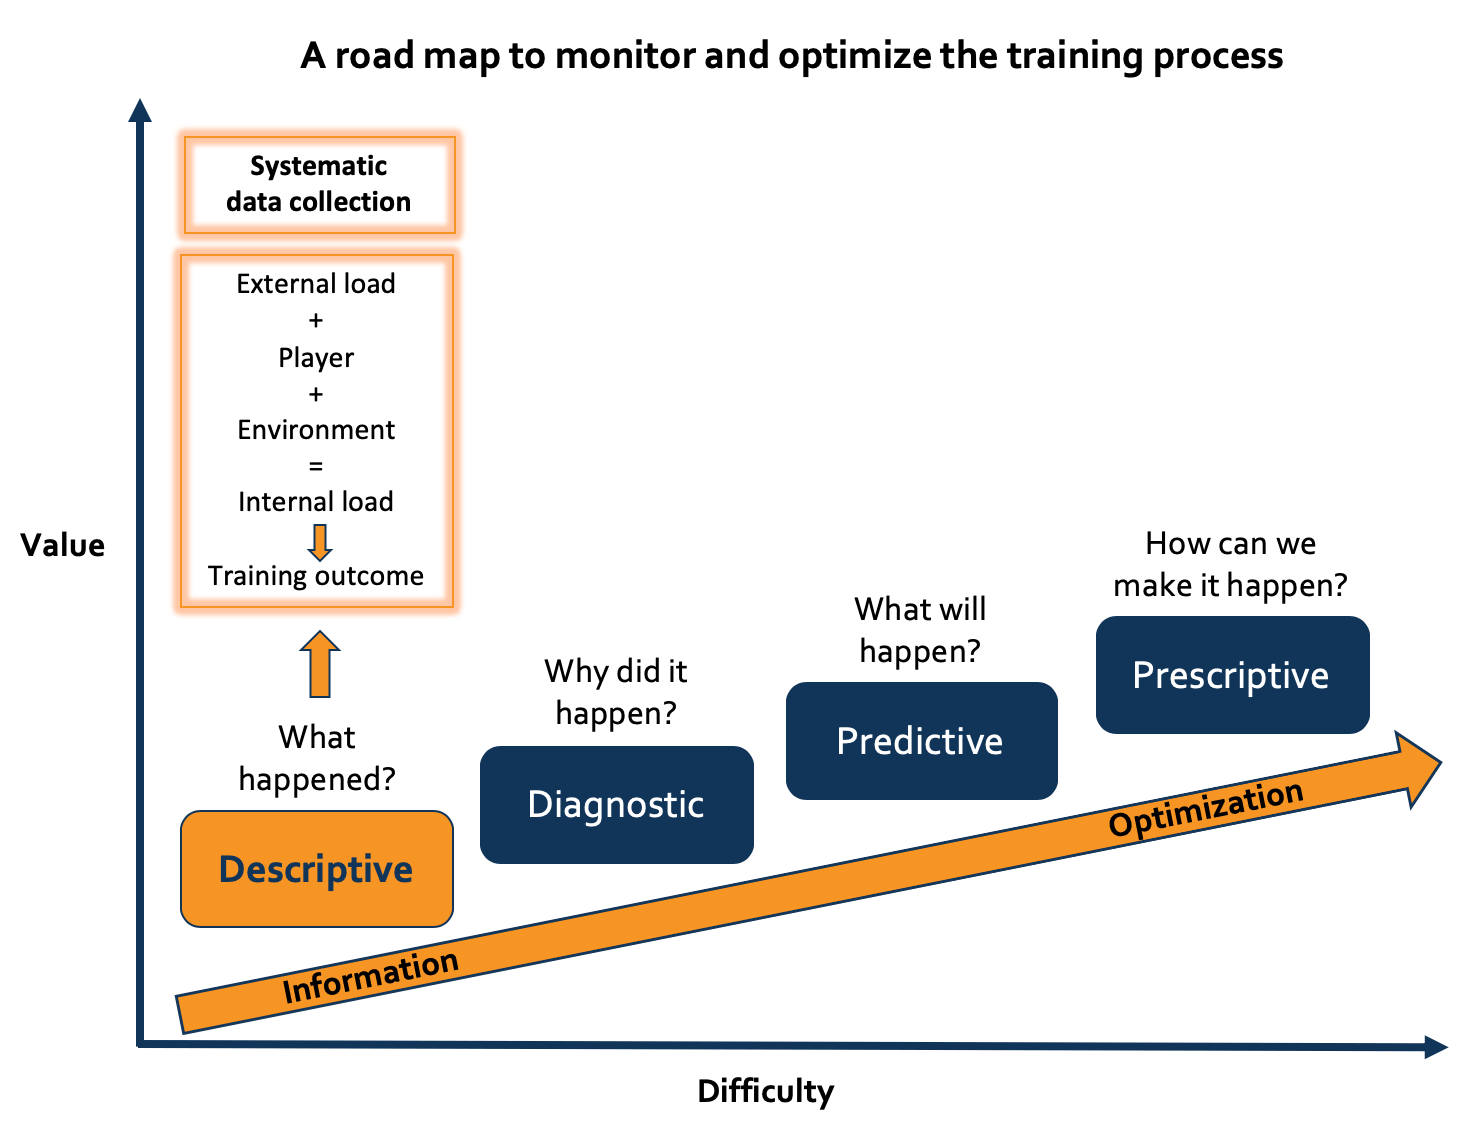 A roadmap to monitoring and optimizing the training process